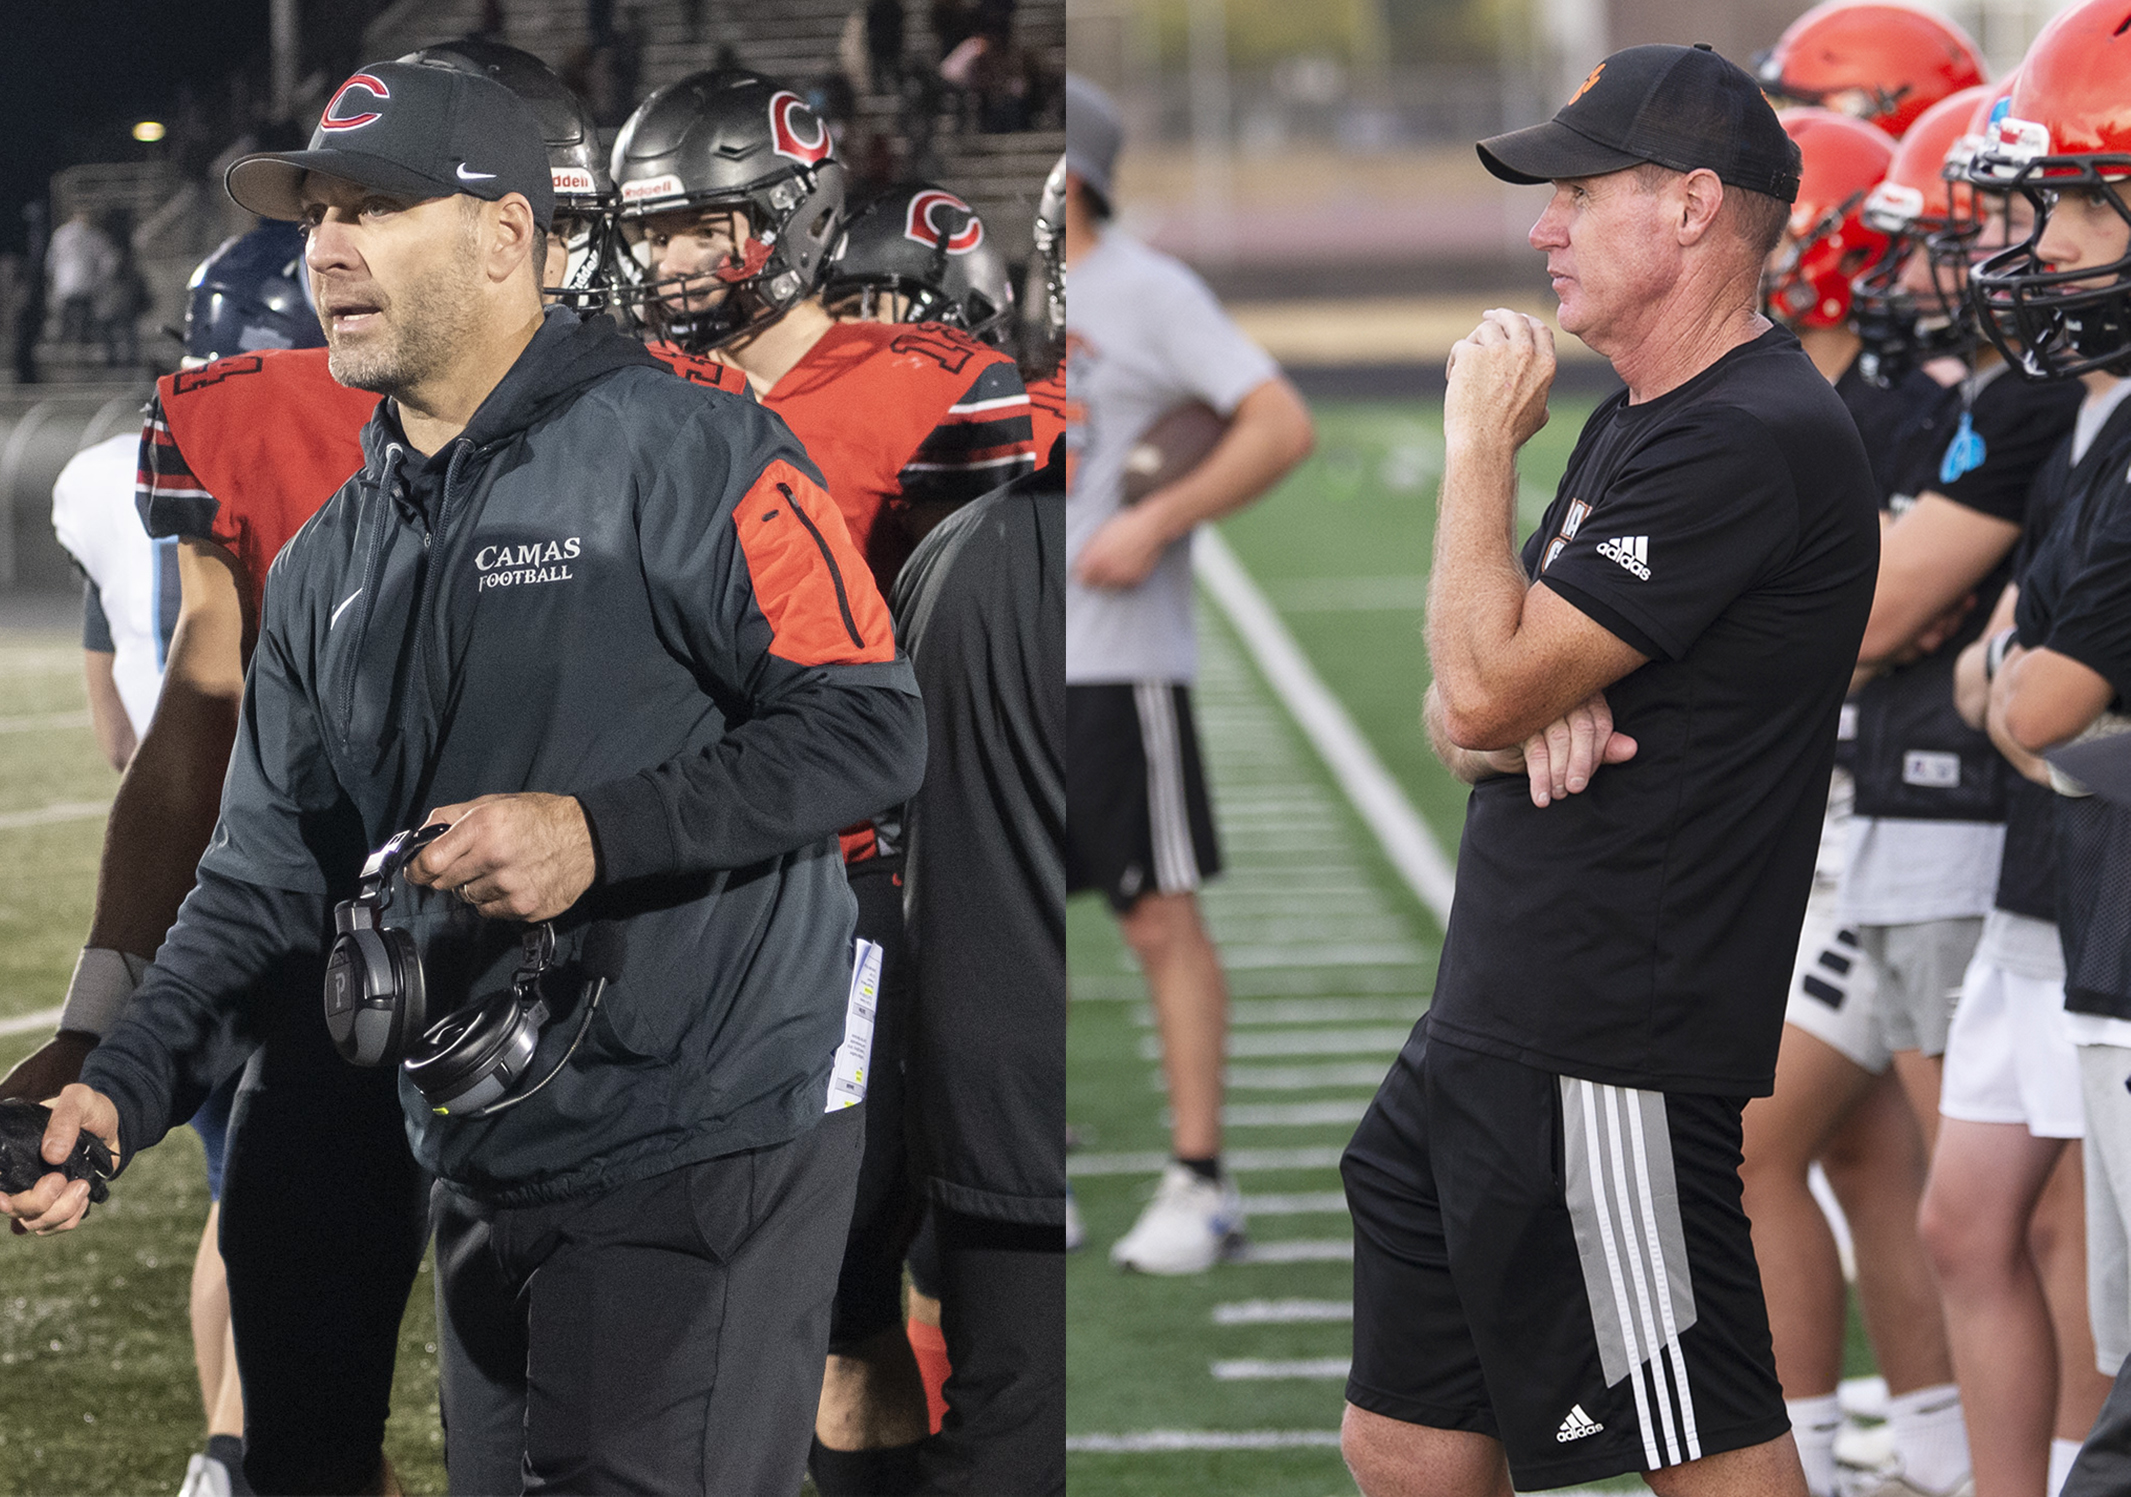 Camas head coach Jack Hathaway, left, and Battle Ground head coach Mike Woodward, right, have known each other since Woodward was head coach at Mountain View during Hathaway’s senior football season in 1999. They later coached together in Vancouver and San Diego.